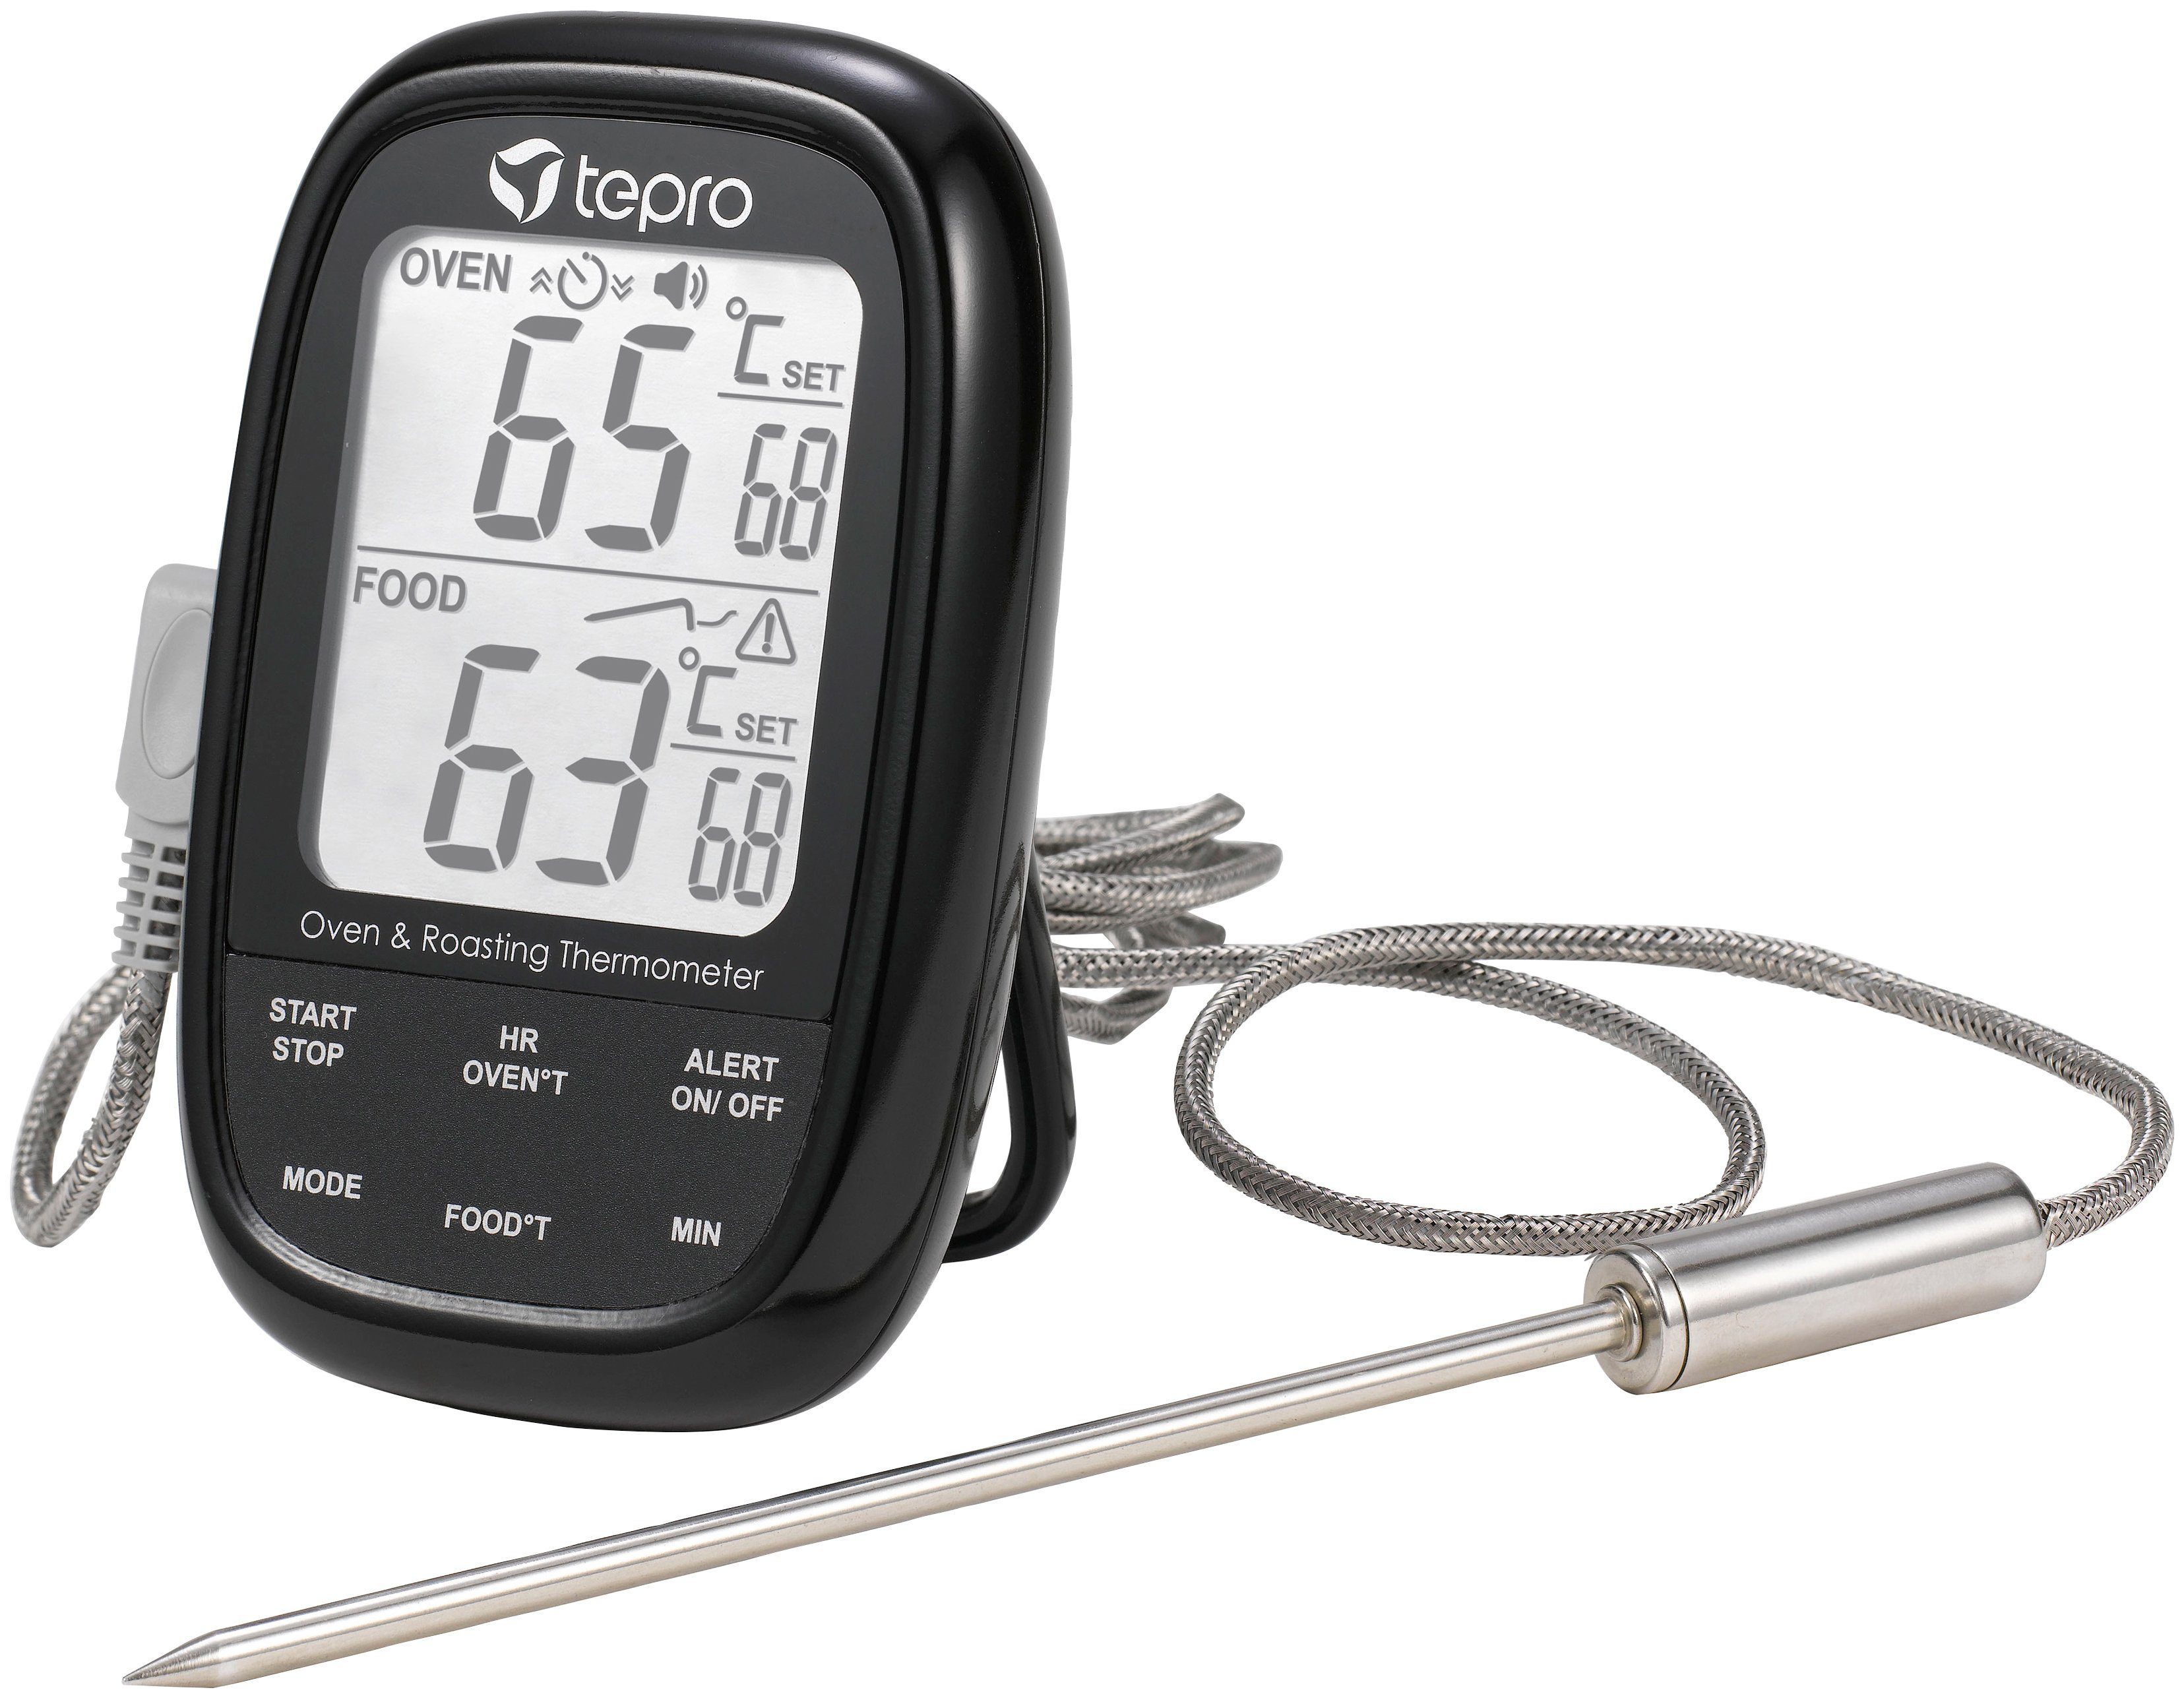 Tepro Grillthermometer, mit Dualsensor | Grillthermometer